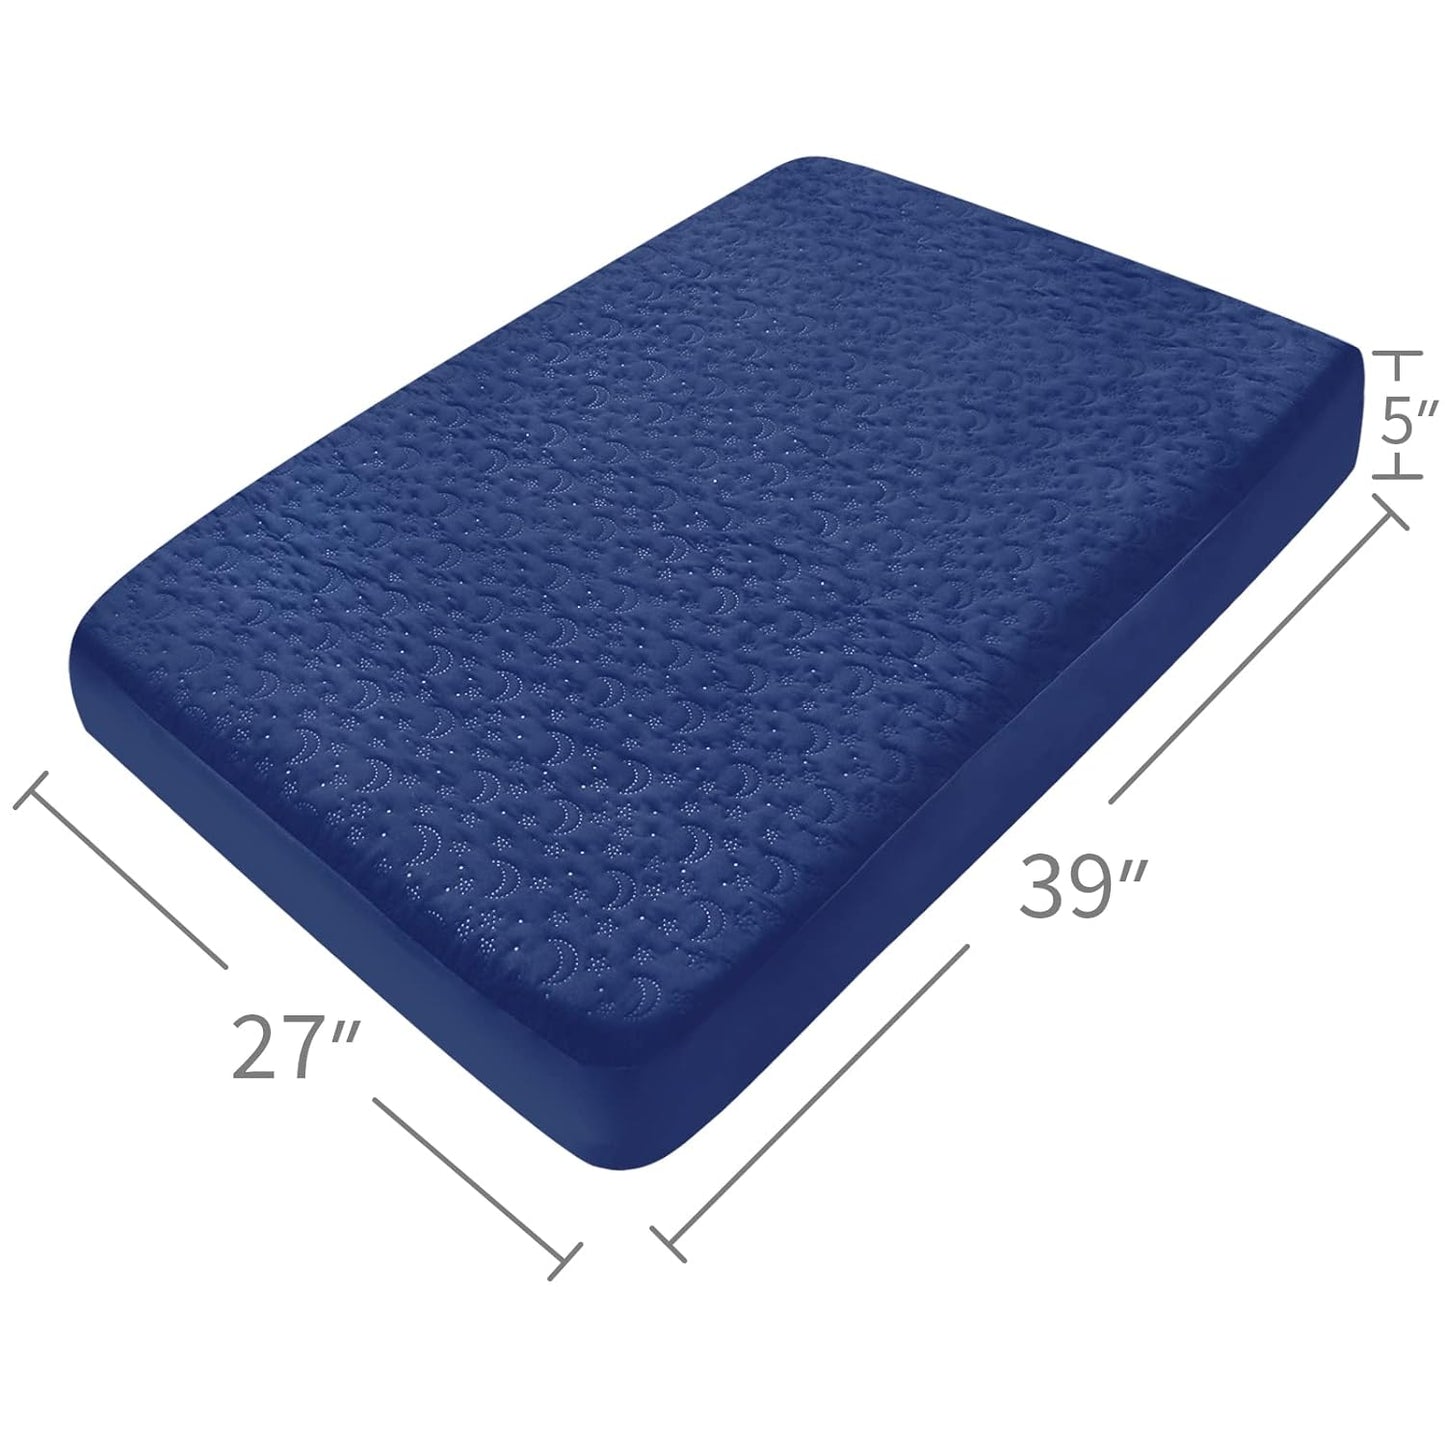 Pack N Play Mattress Pad Cover/ Protector - Ultra-Soft Microfiber, Waterproof, 2Pack, Grey and Navy